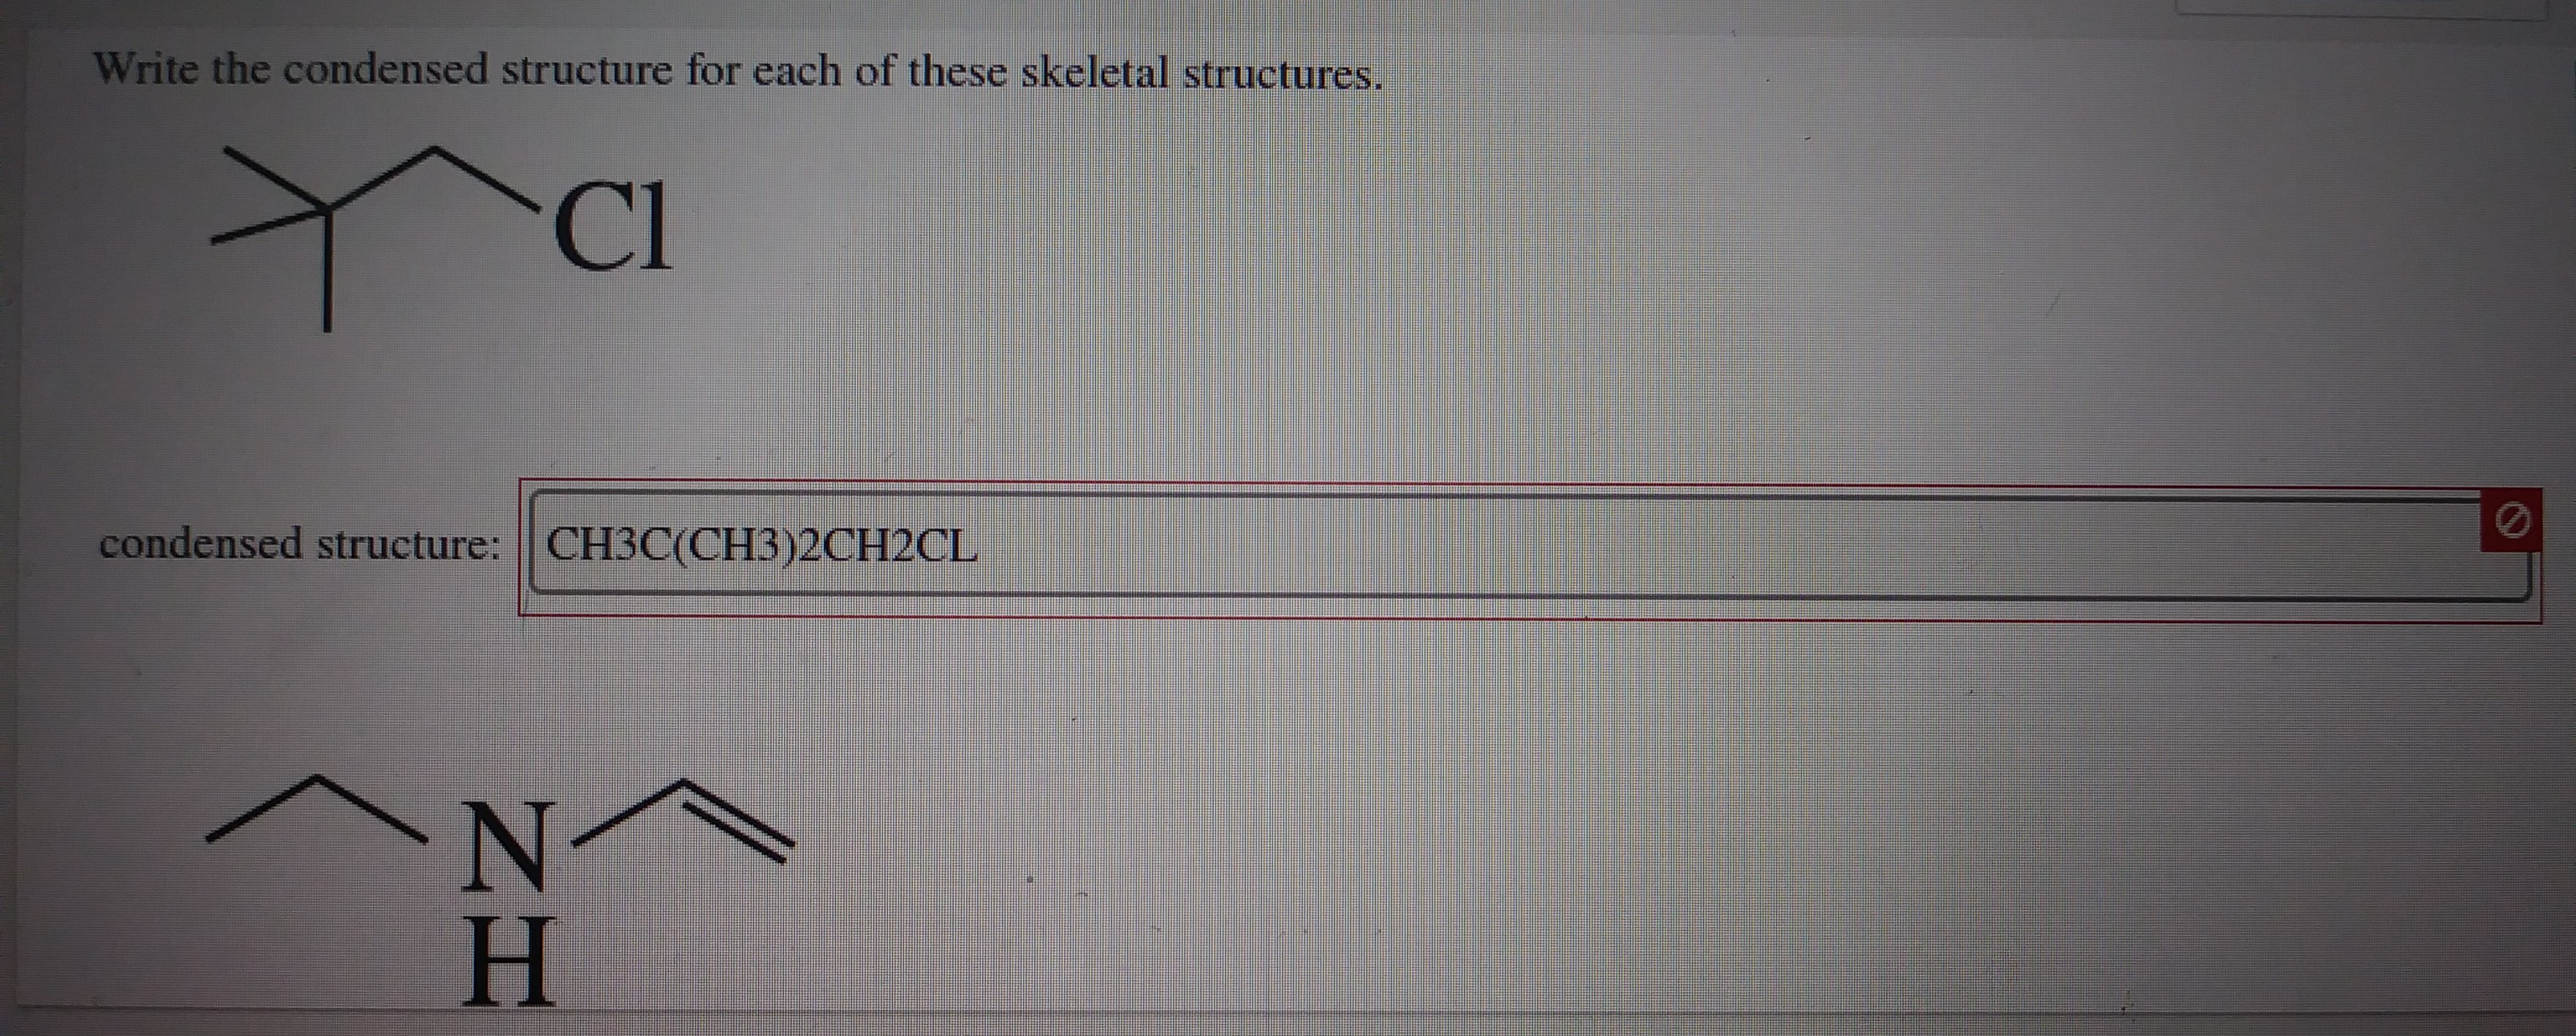 Write the condensed structure for each of these skeletal structures.
Cl
condensed structure: CH3C(CH3)2CH2CL
